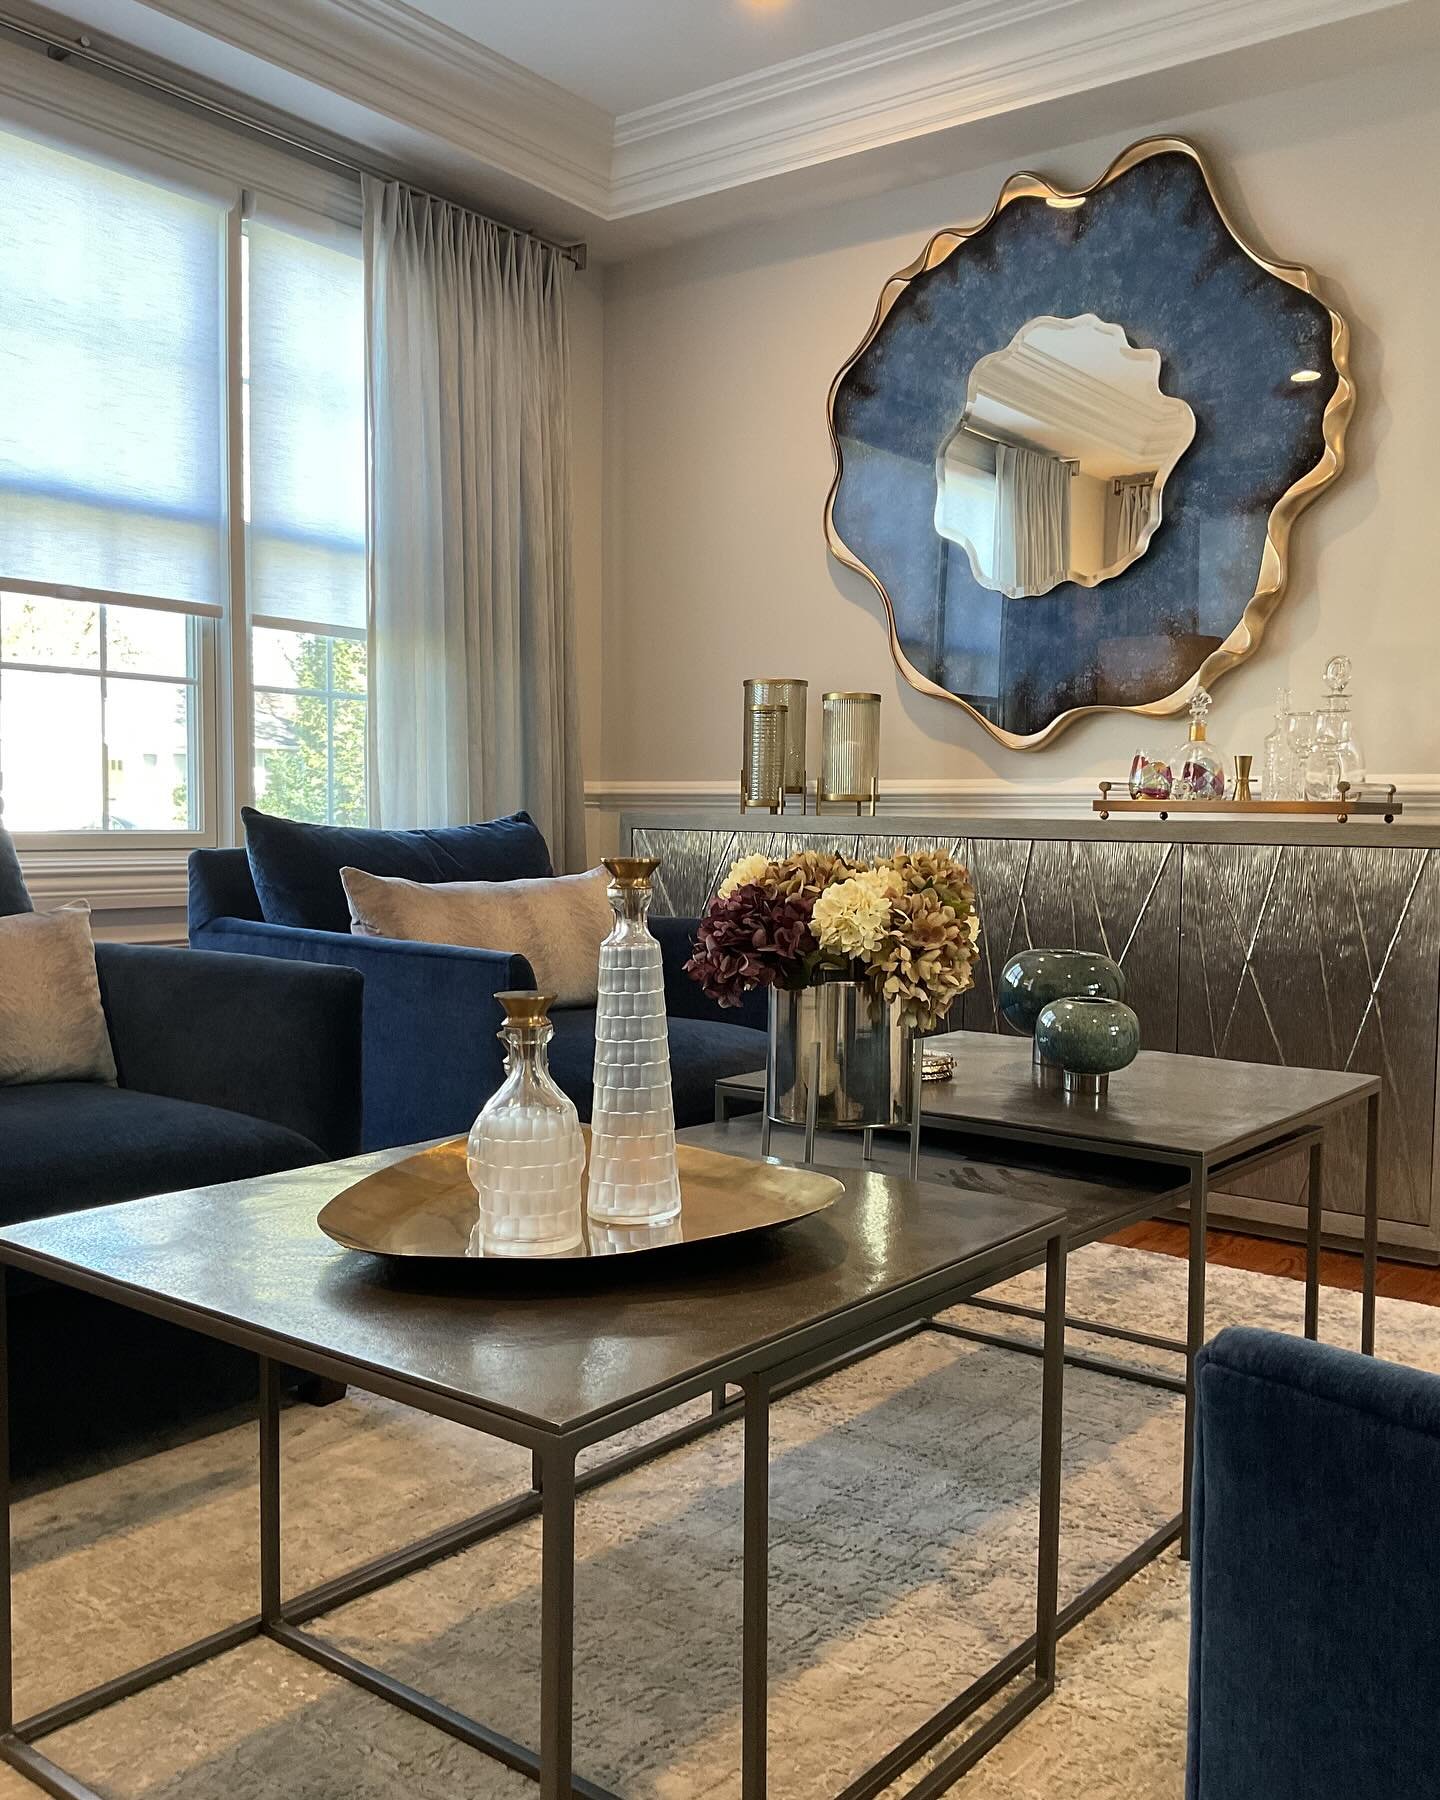 Stunning new sitting area in the formal living room. The shades of blue = lux and relaxation! 💙

@johnrichardcollection
@bernhardtfurniture
@leeindustries
@jaipurliving
@curreyco
@artertiorshome

#homedecor #homedesign #interiordesign #njinteriordes